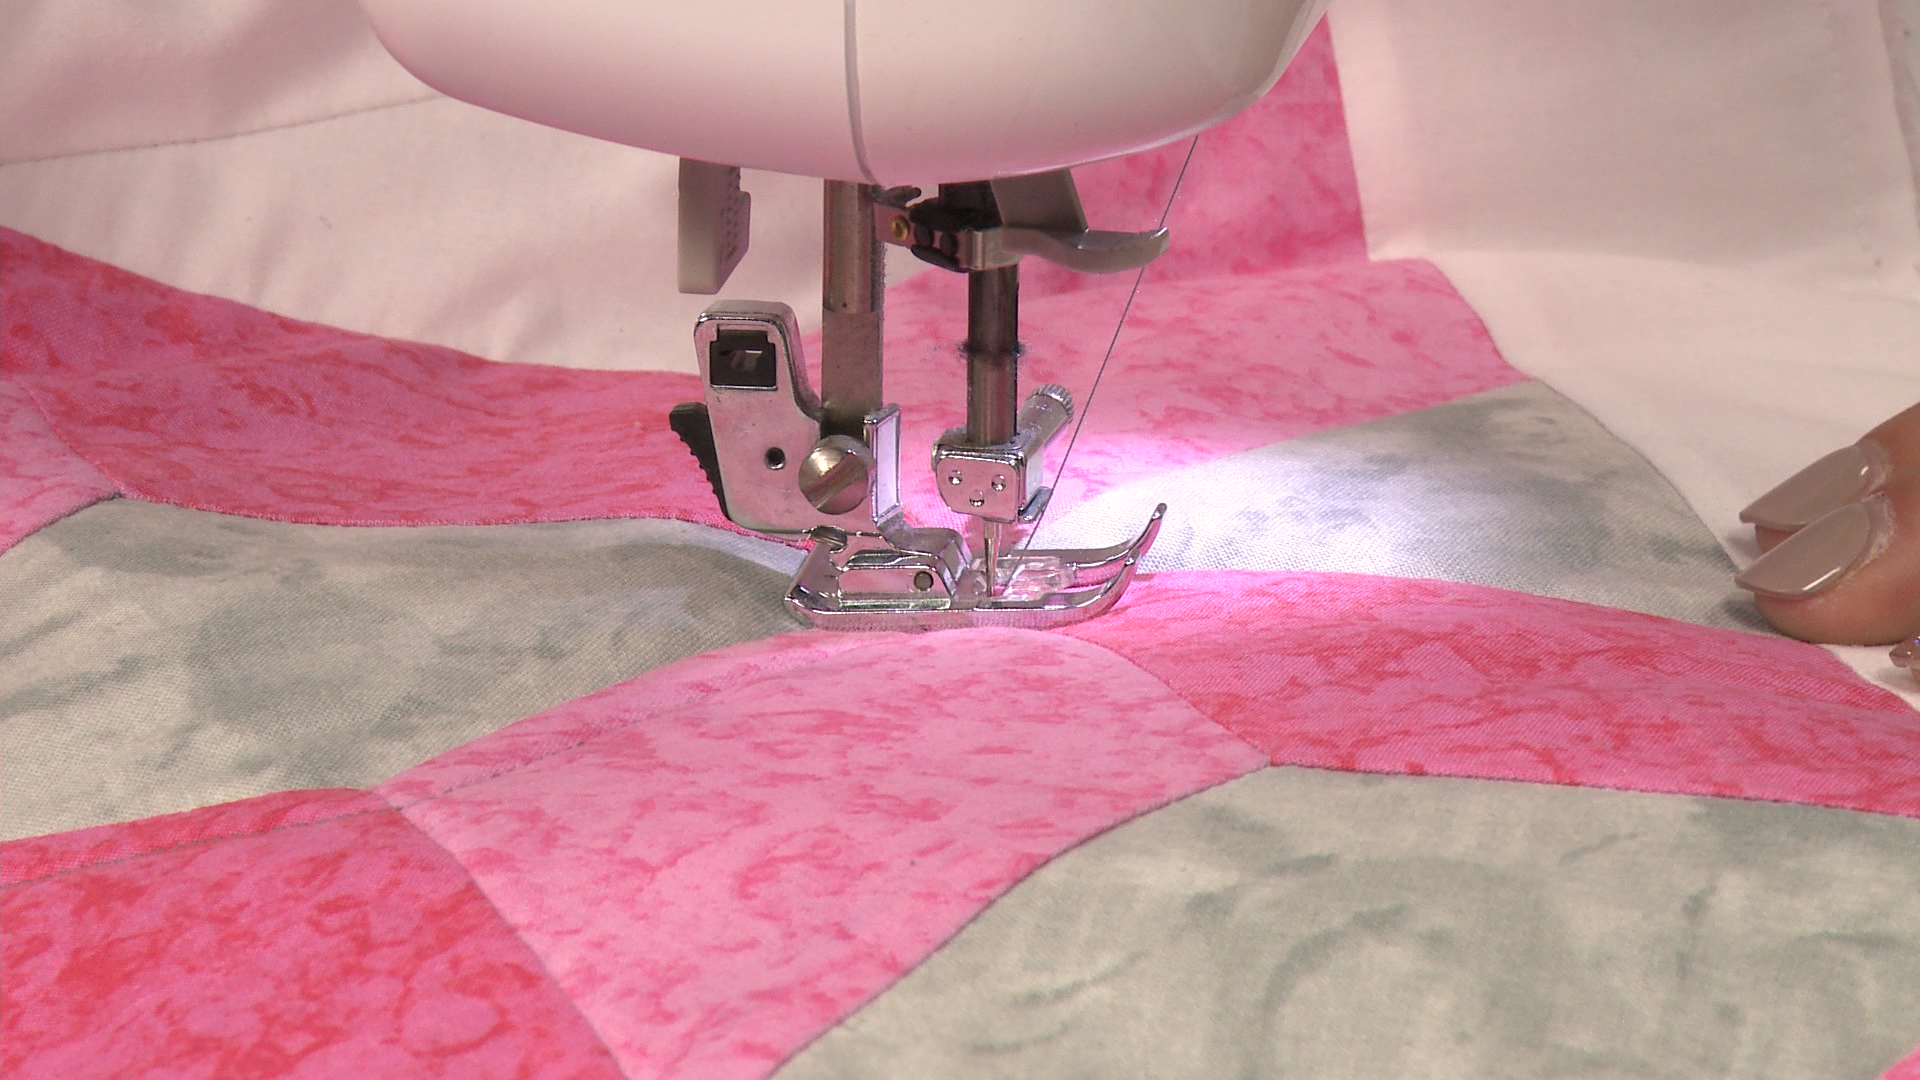 Session 6: Machine Quilting Tips